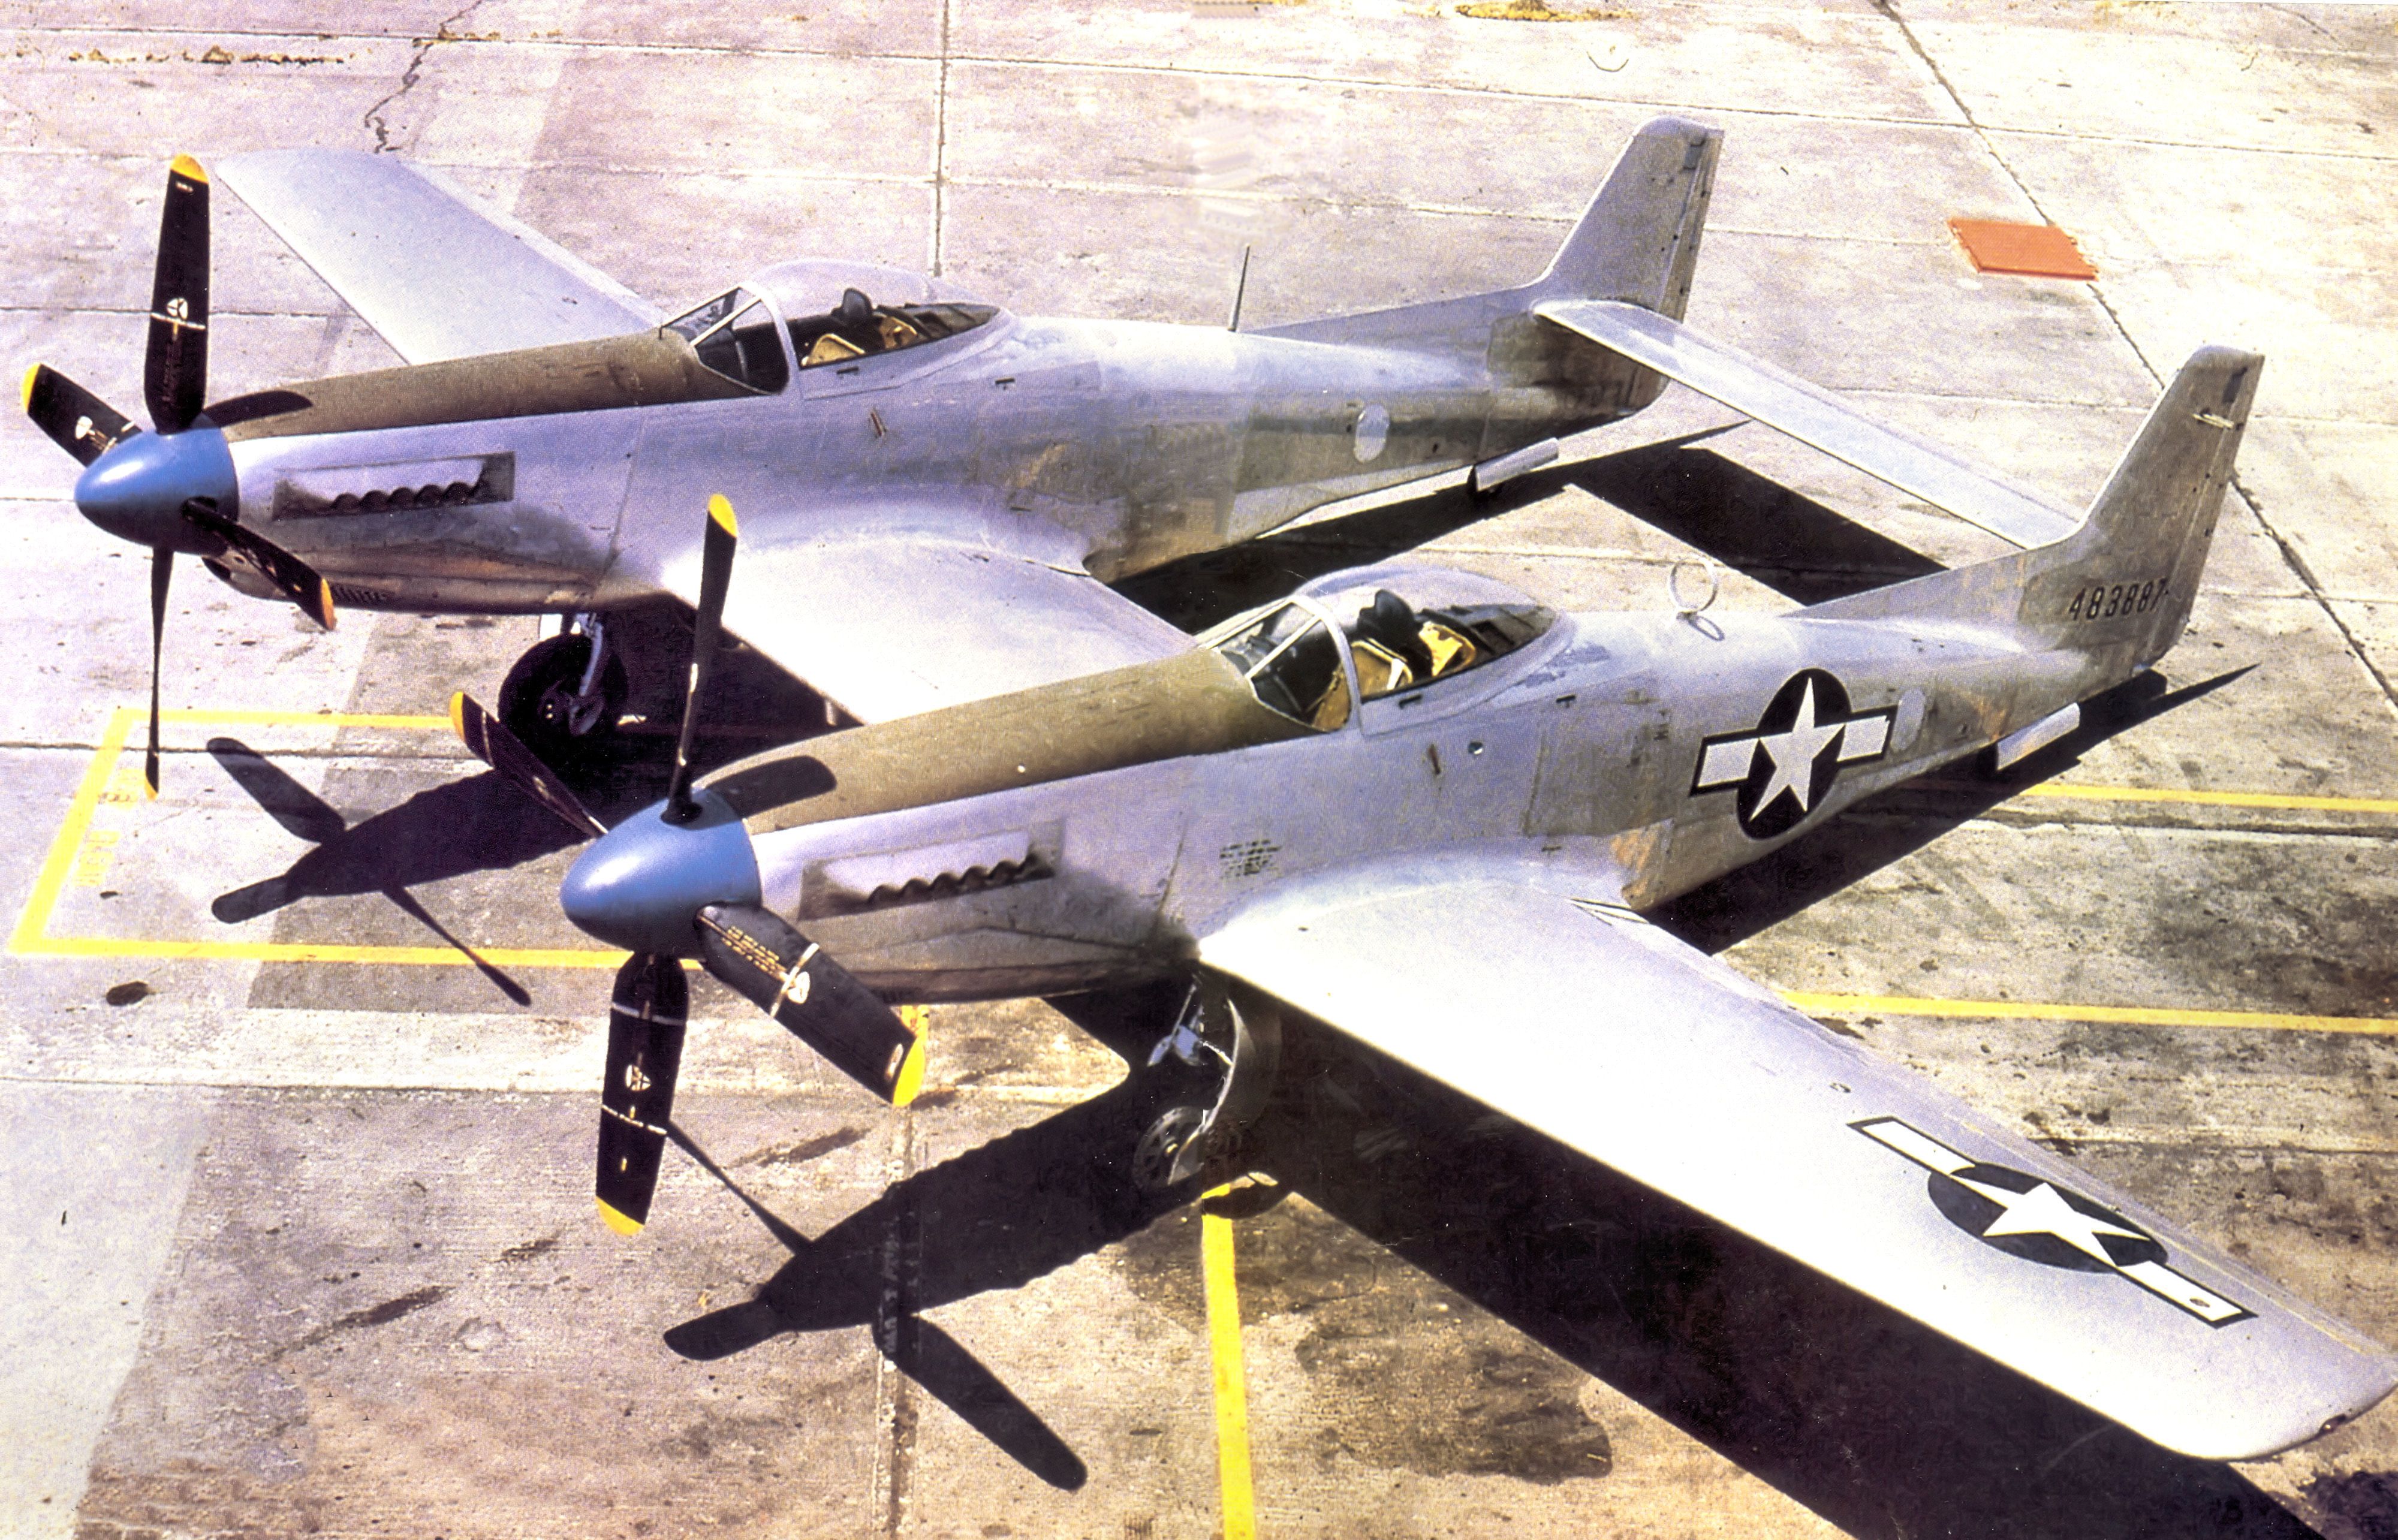 https://hips.hearstapps.com/hmg-prod/images/north-american-xp-82-twin-mustang-1546552050.jpg